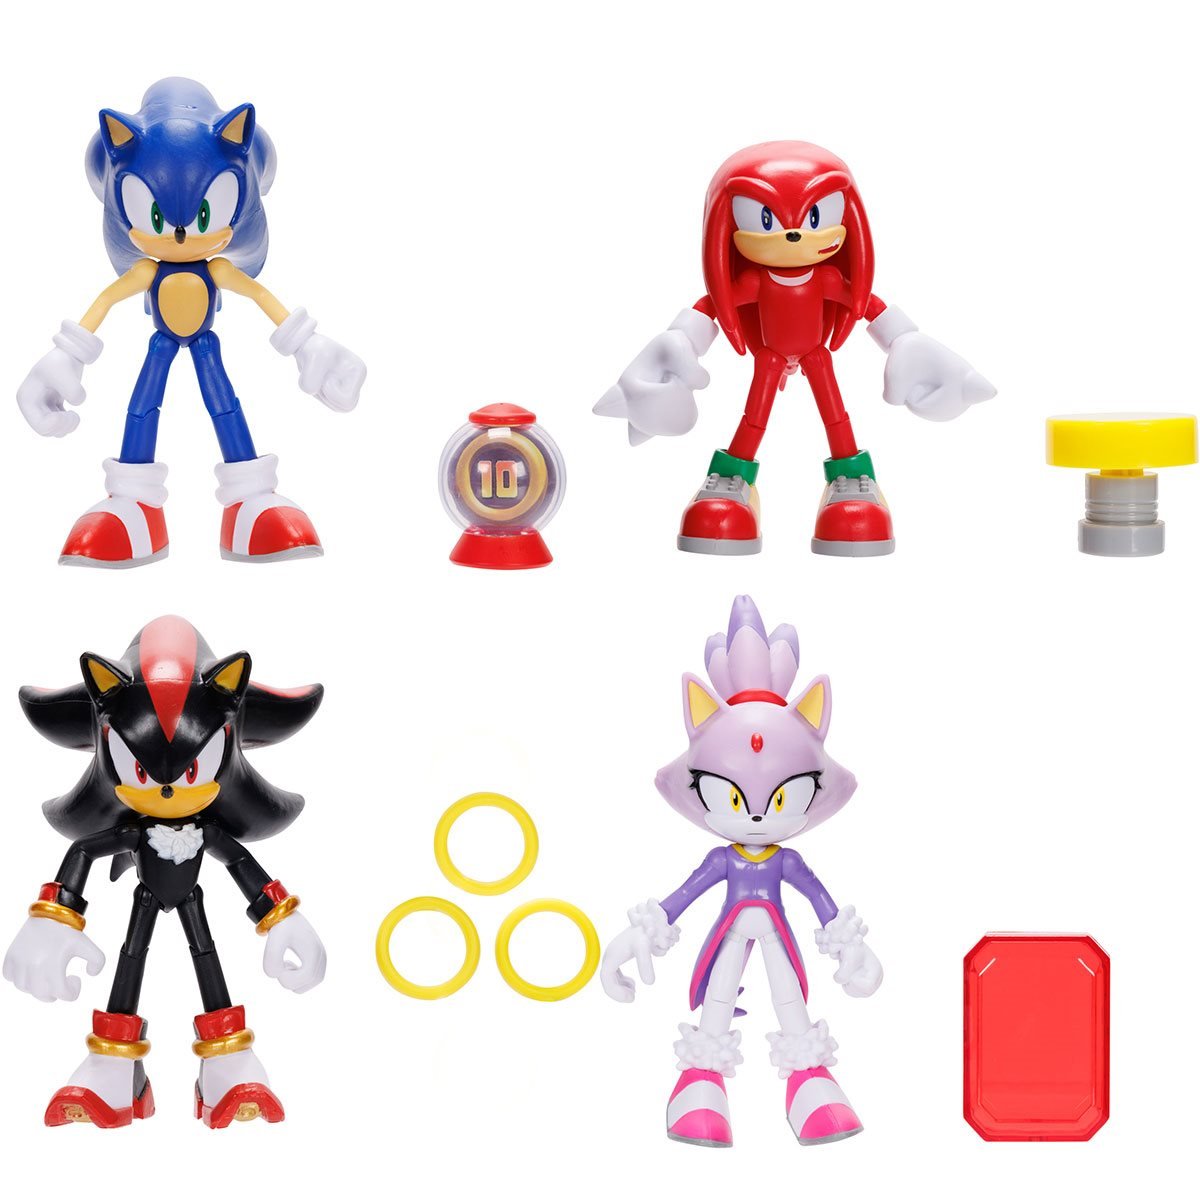 Sonic the Hedgehog 2 1/2-Inch Action Figures Wave 10 Case of 12